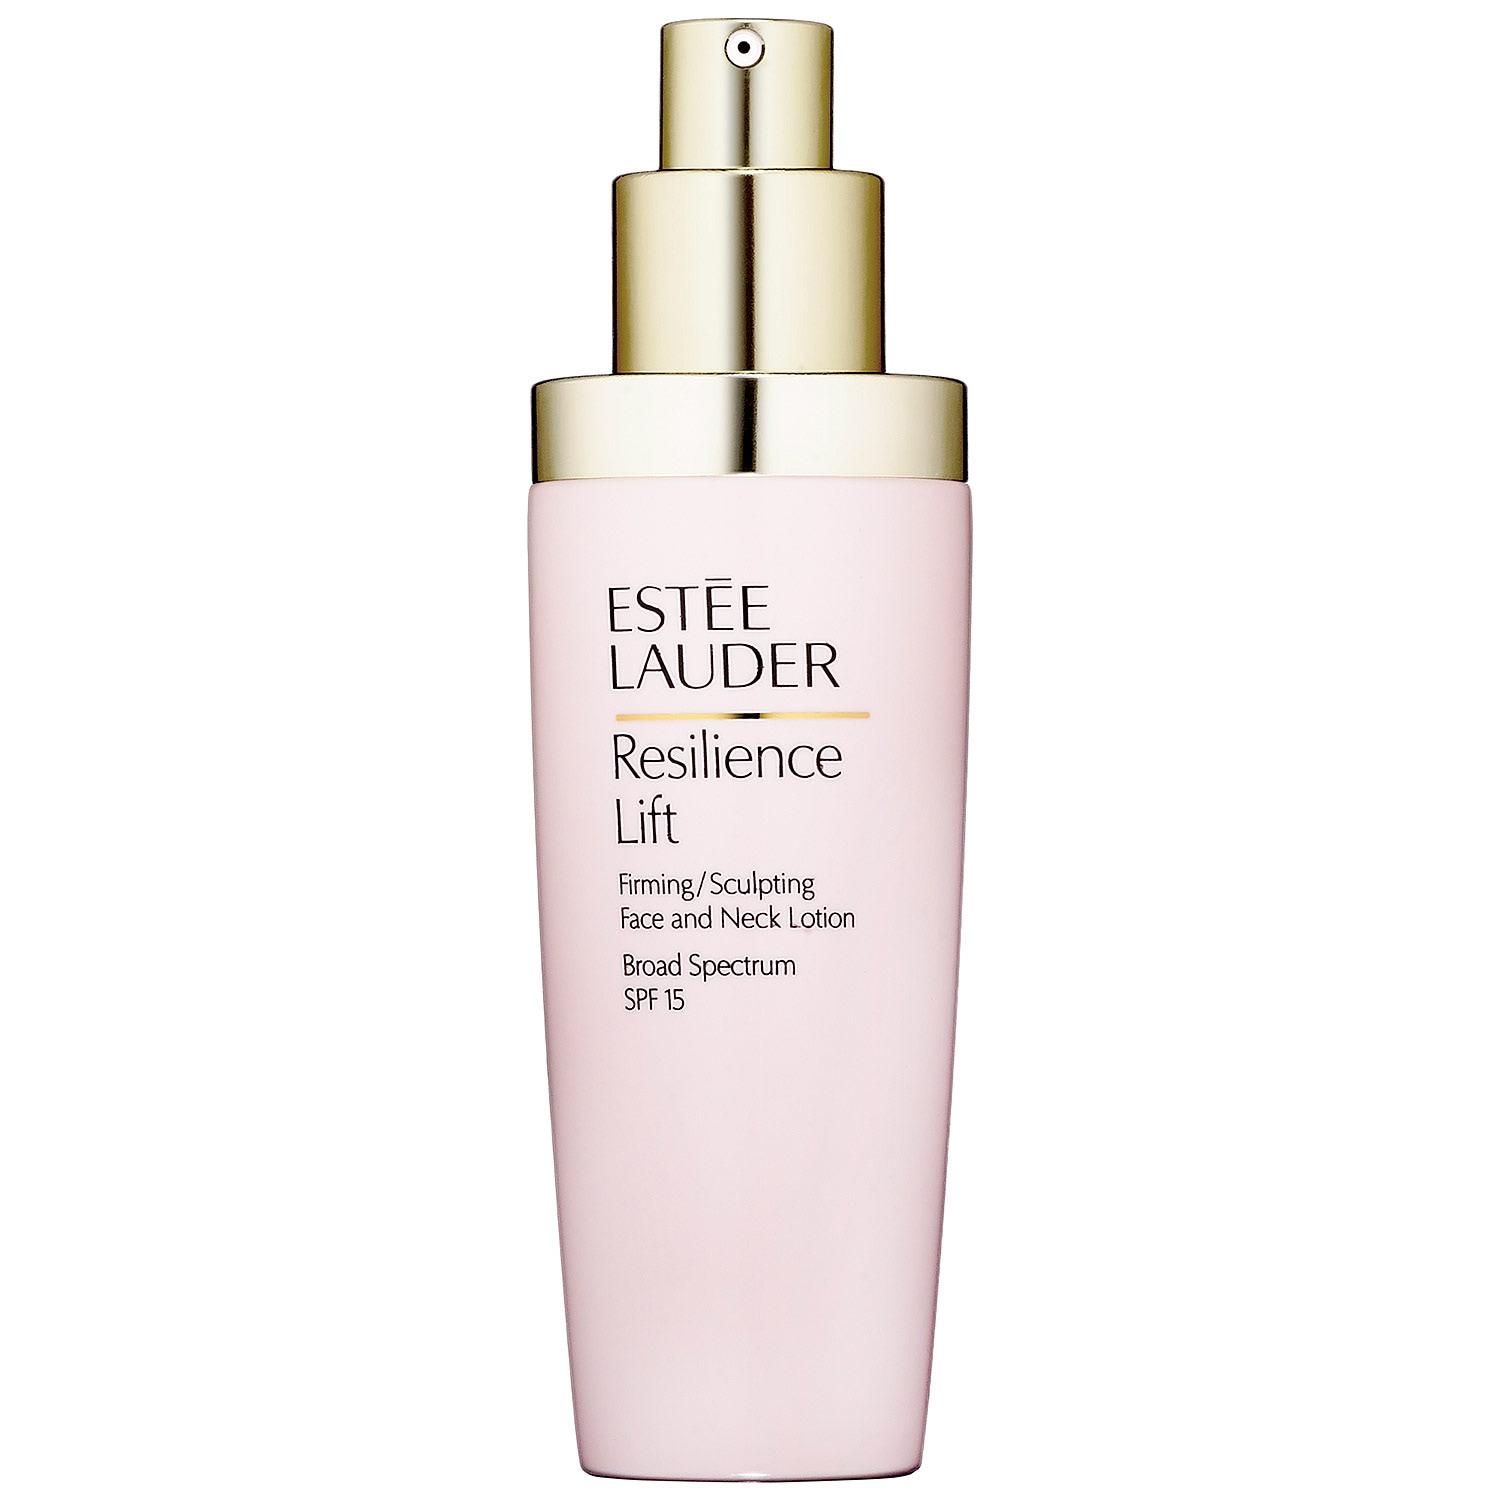 Resilience Lift Firming/Sculpting Face and Neck Lotion SPF 15